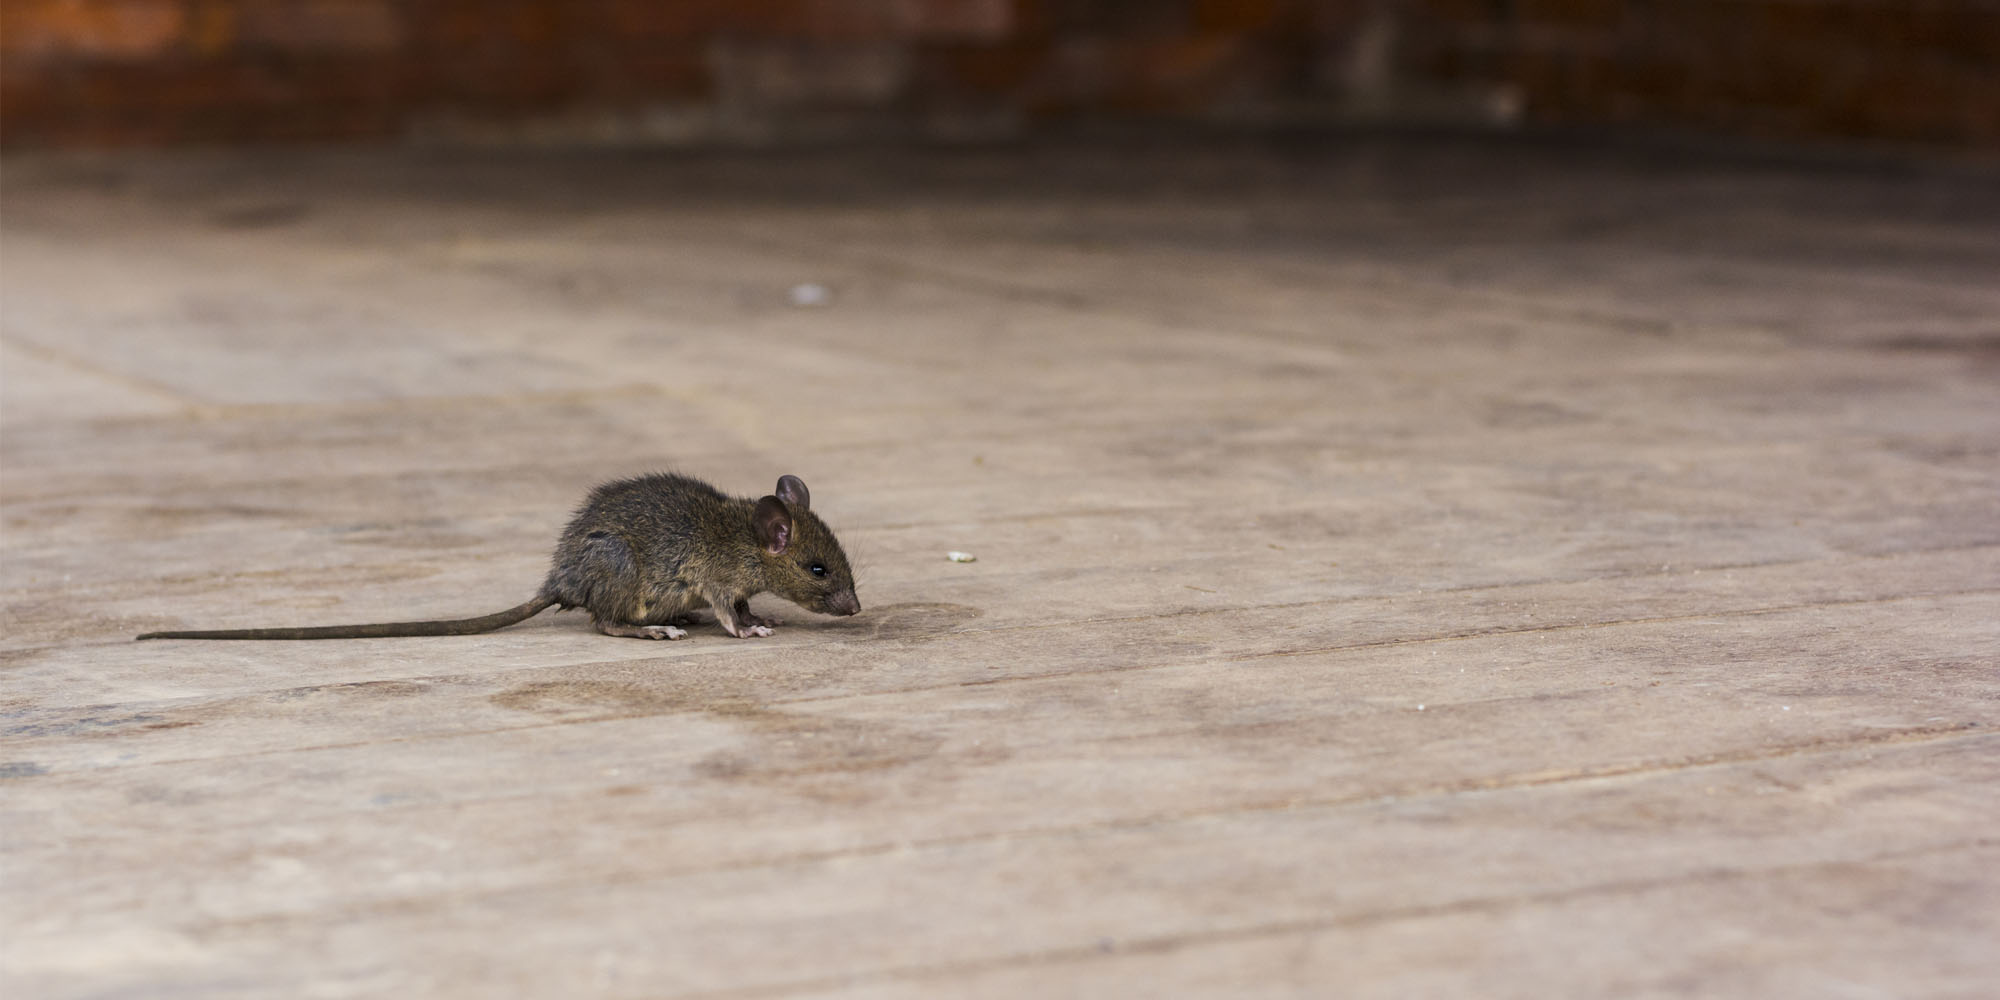 Buyer beware: Mouse traps used outdoors often injure other wildlife